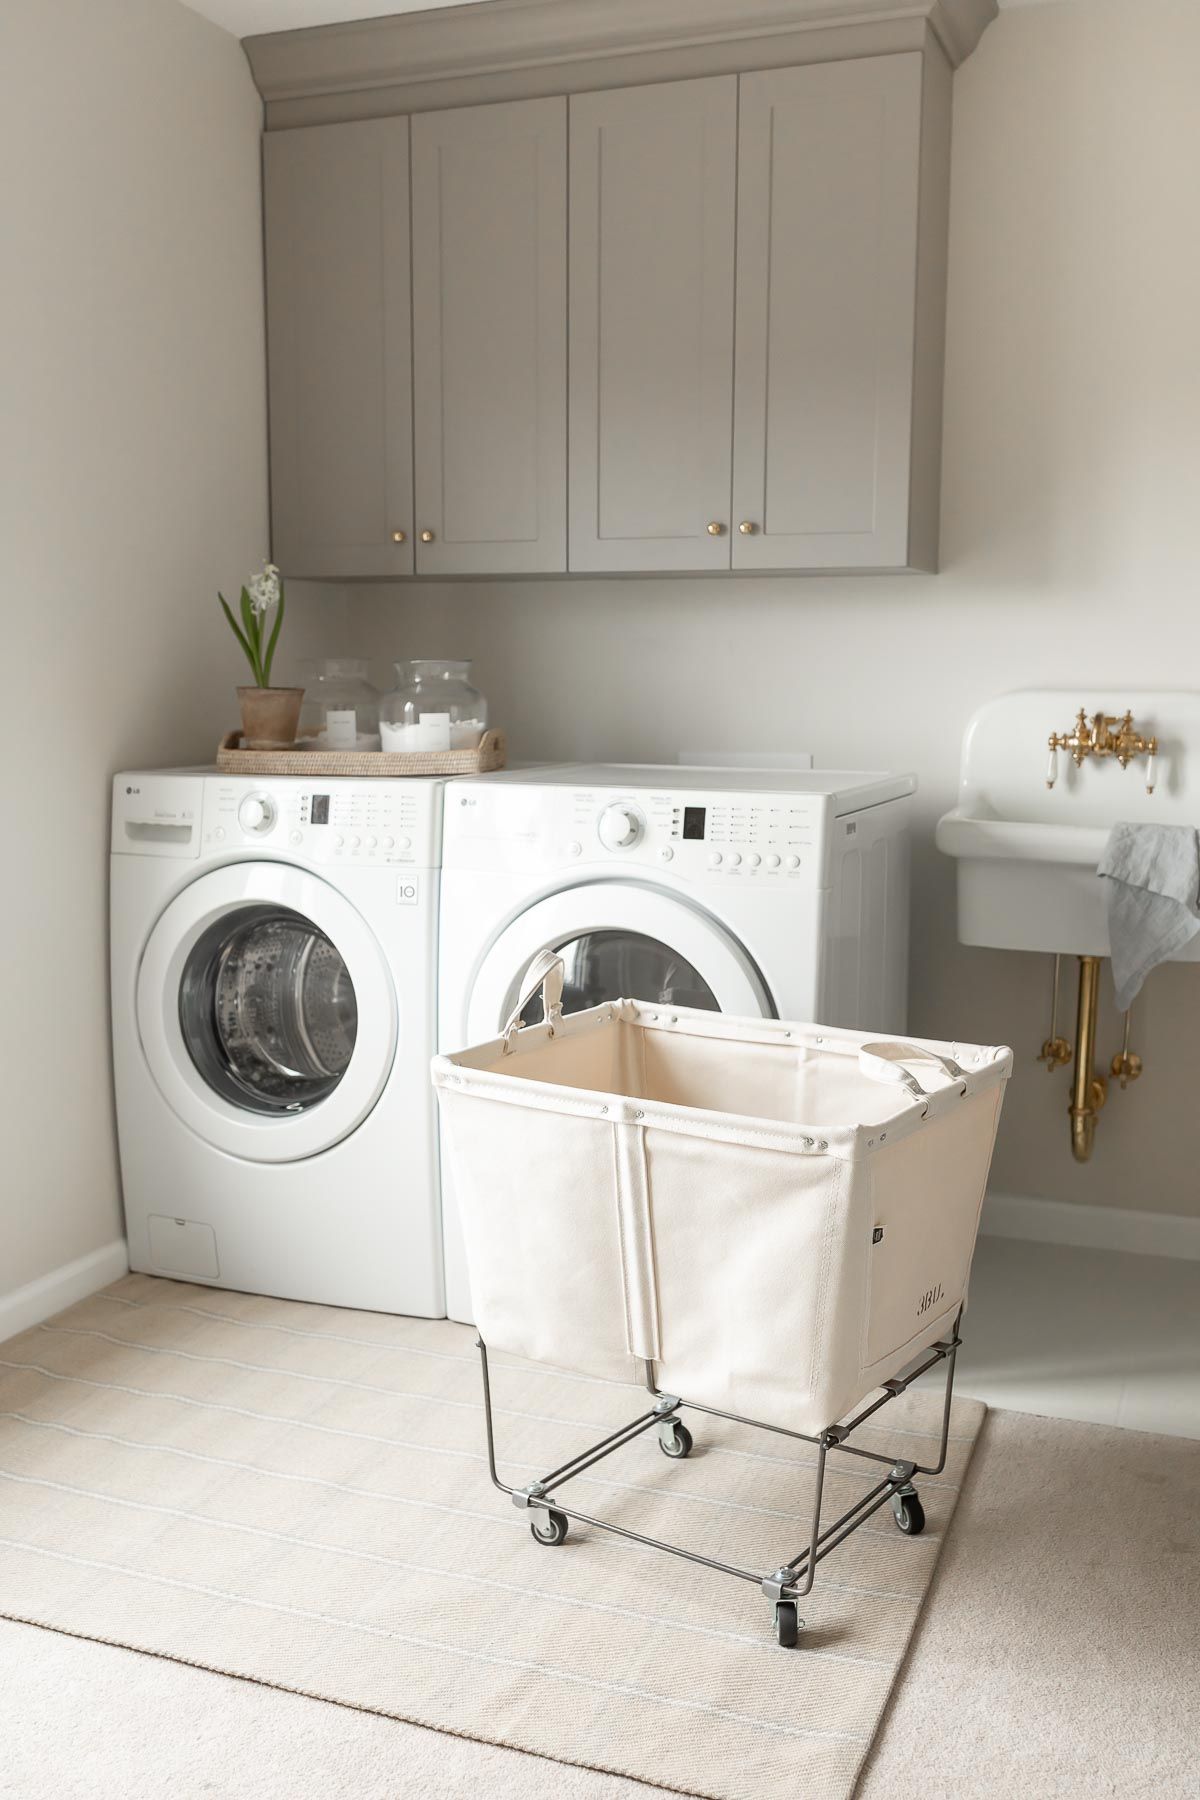 A laundry room with gray cabinets, a white washer and dryer, and a beige carpet on the floor.